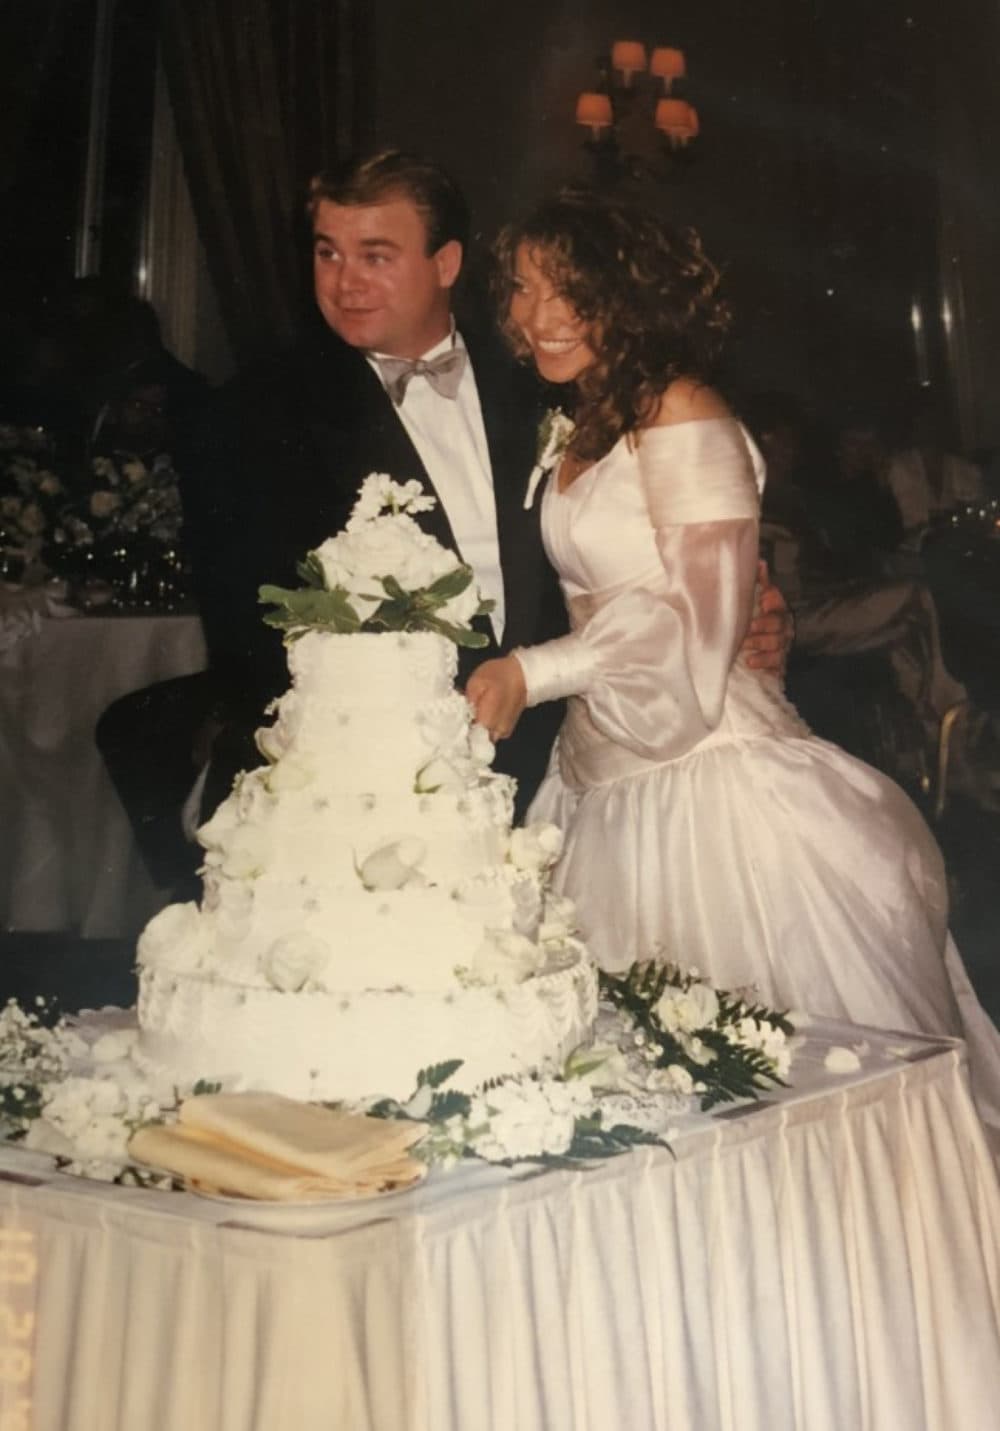 Dennis and Dana, pictured at their wedding in 1996. (Courtesy Lindsay Cook)